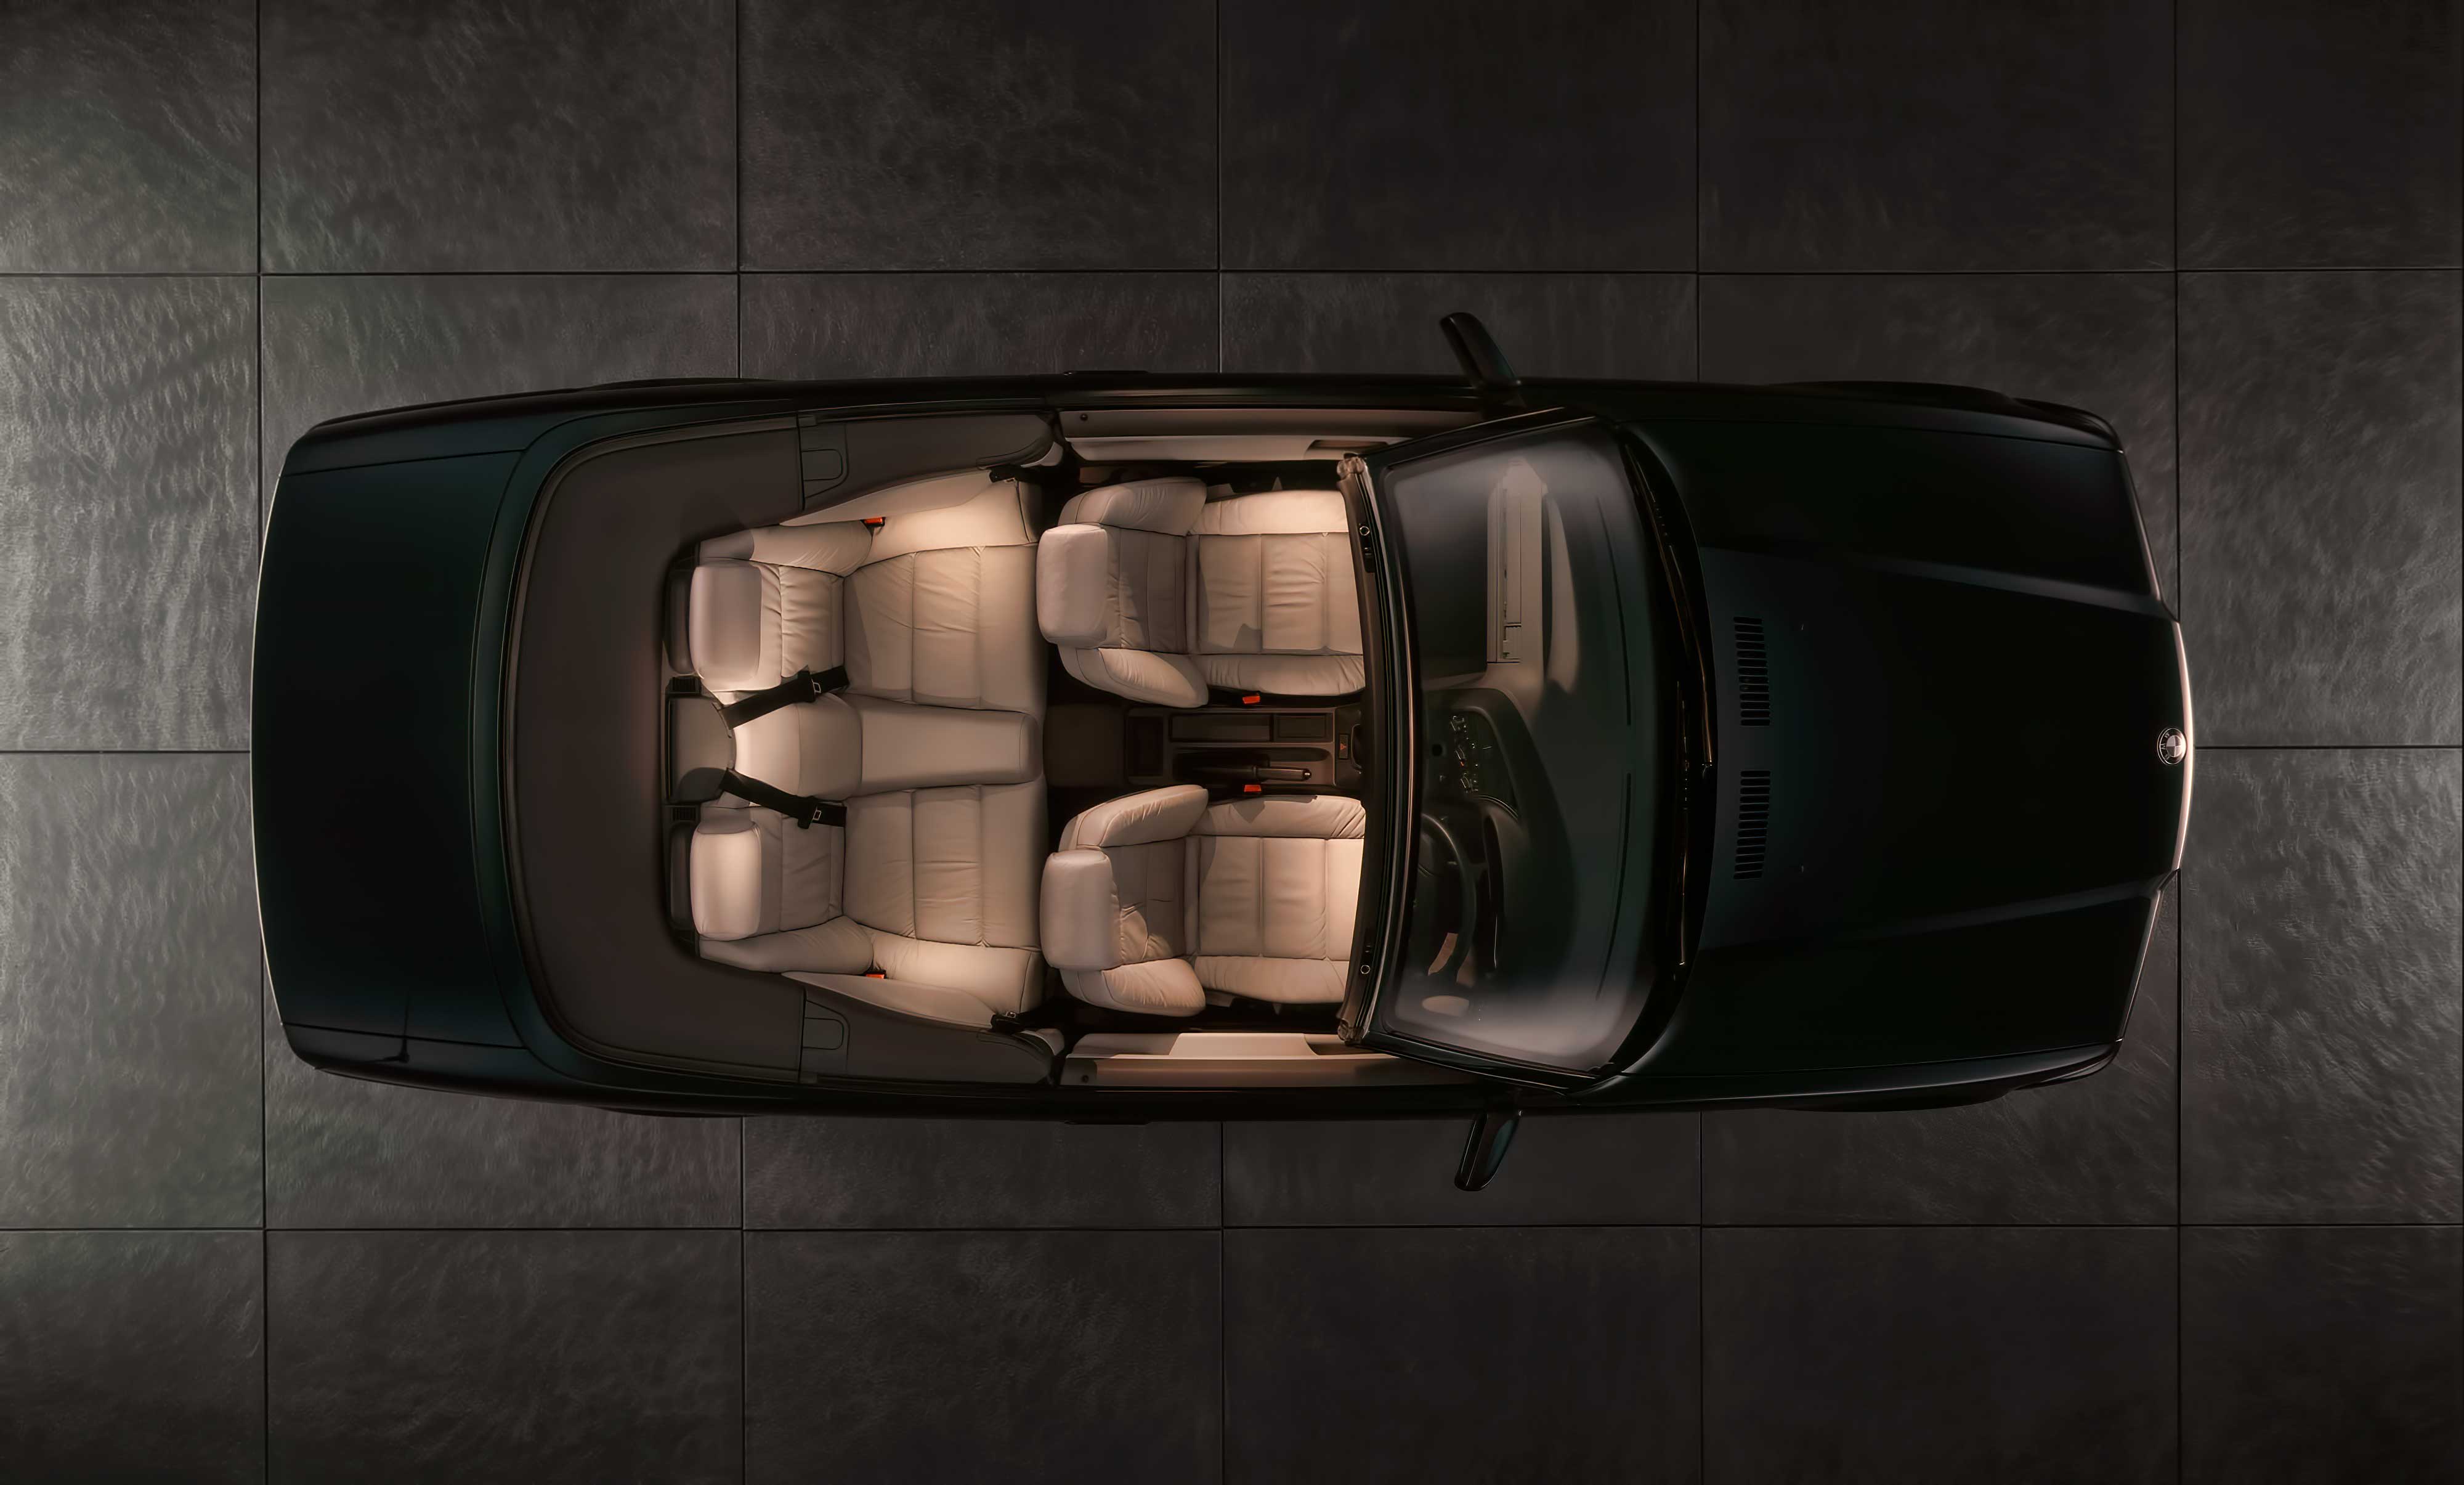 Overhead image of a car in a studio